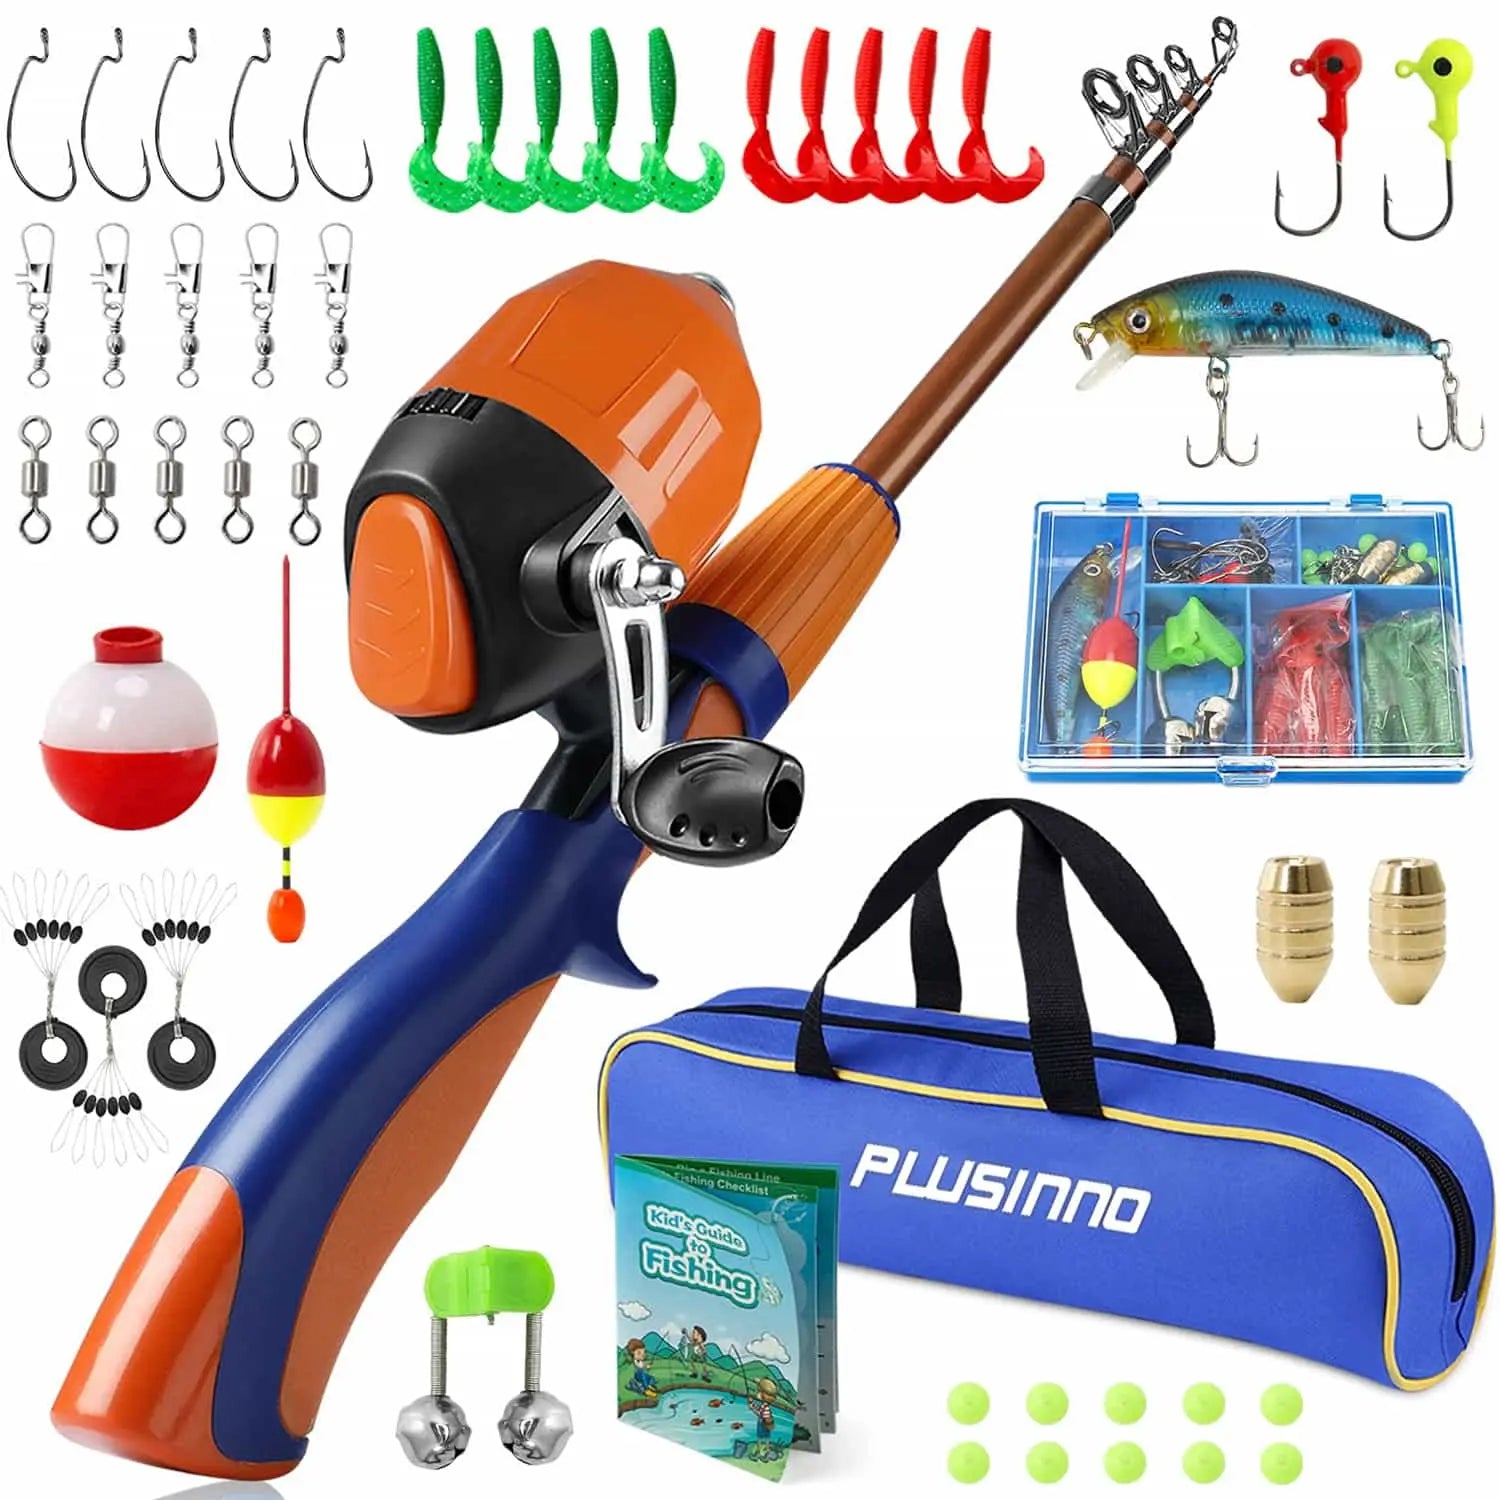 Oystern Kid’s Fishing Pole Kit with Spinning Reel - 62 Piece Tackle Bag,  4lb Line - Including Beginner’s Guide eBook - Toddler Fishing Pole Combo 